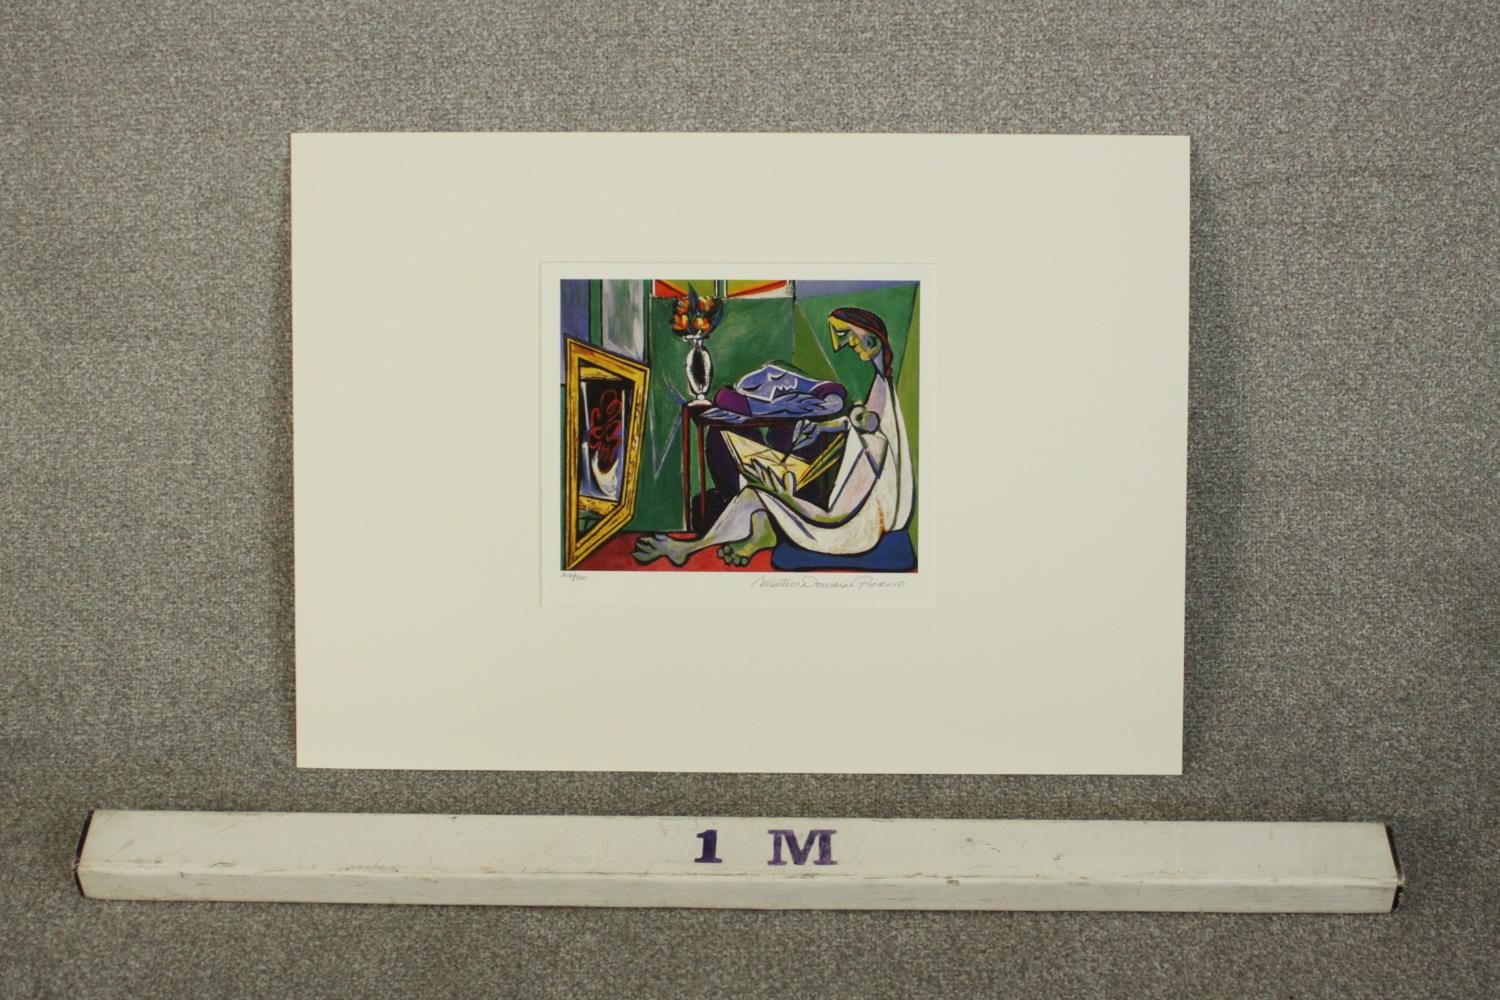 After Pablo Picasso, La Muse (The Muse), (1935), giclée print on archival paper, edition 207/500. - Image 3 of 6